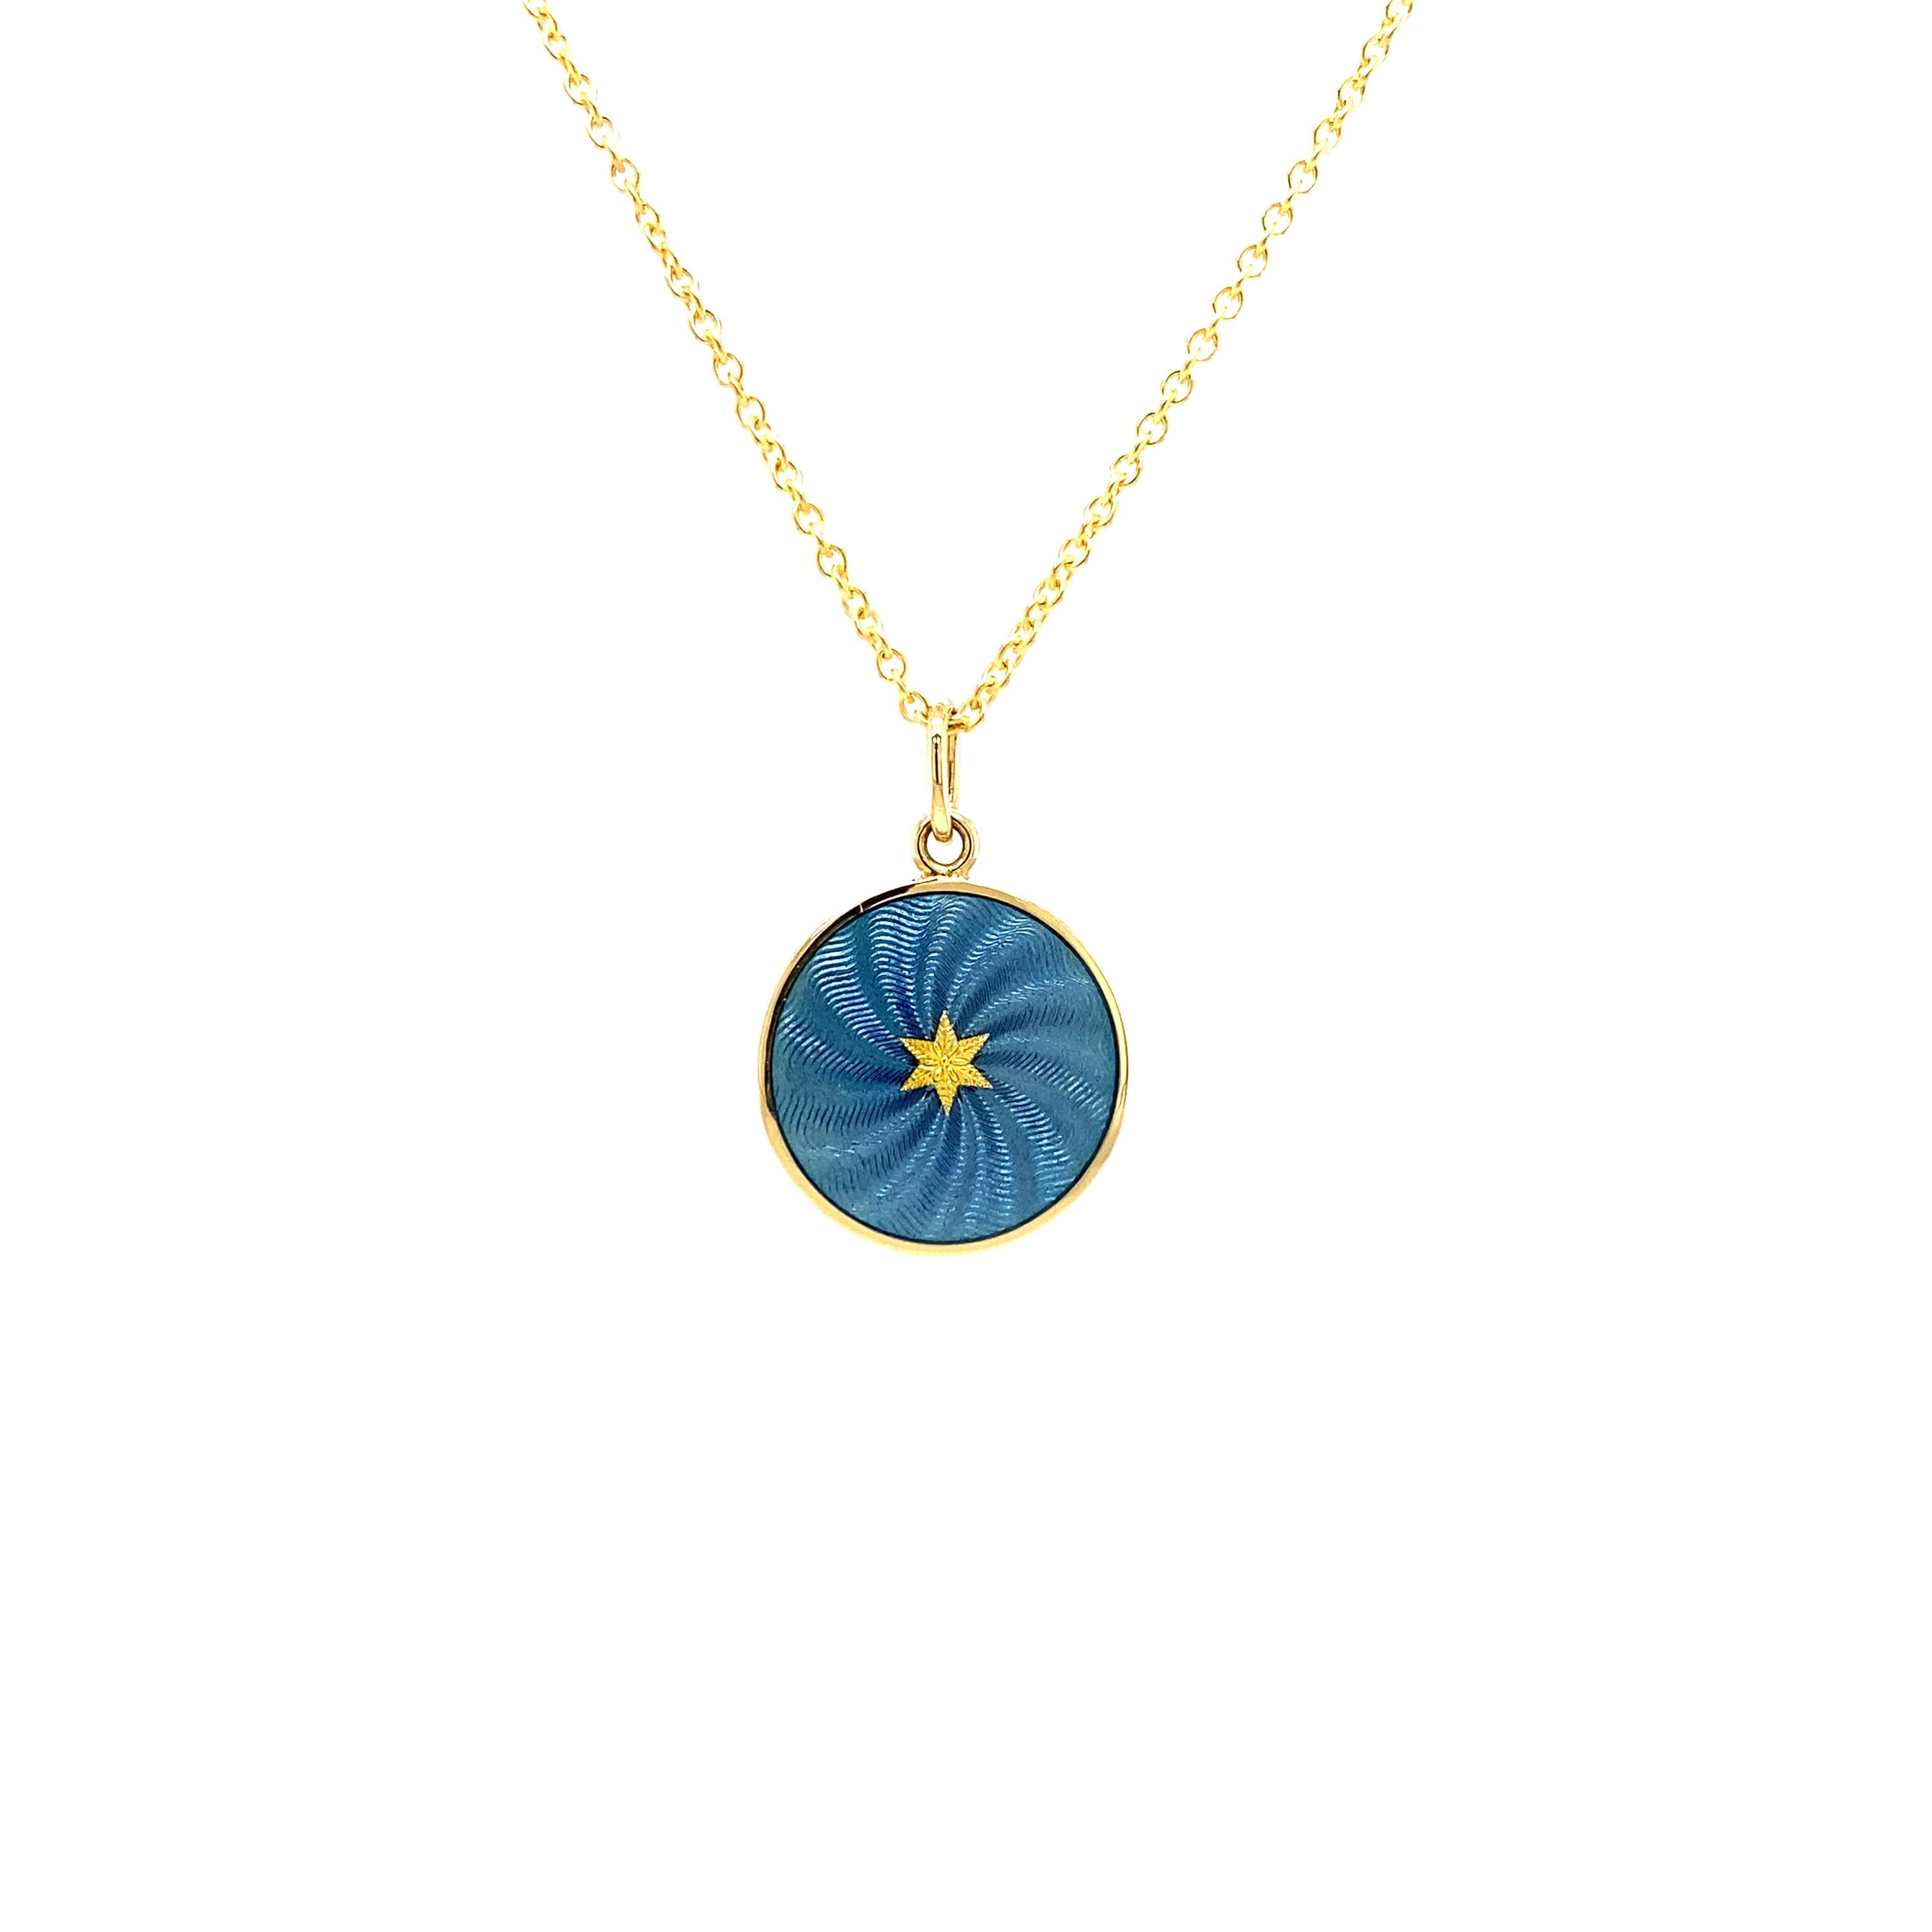 Victor Mayer round pendant necklace with star 18k yellow gold, Diskos Collection, middle blue vitreous enamel with ornamental paillon in the shape of a six-rayed star, diameter app. 15.0 mm

About the creator Victor Mayer
Victor Mayer is